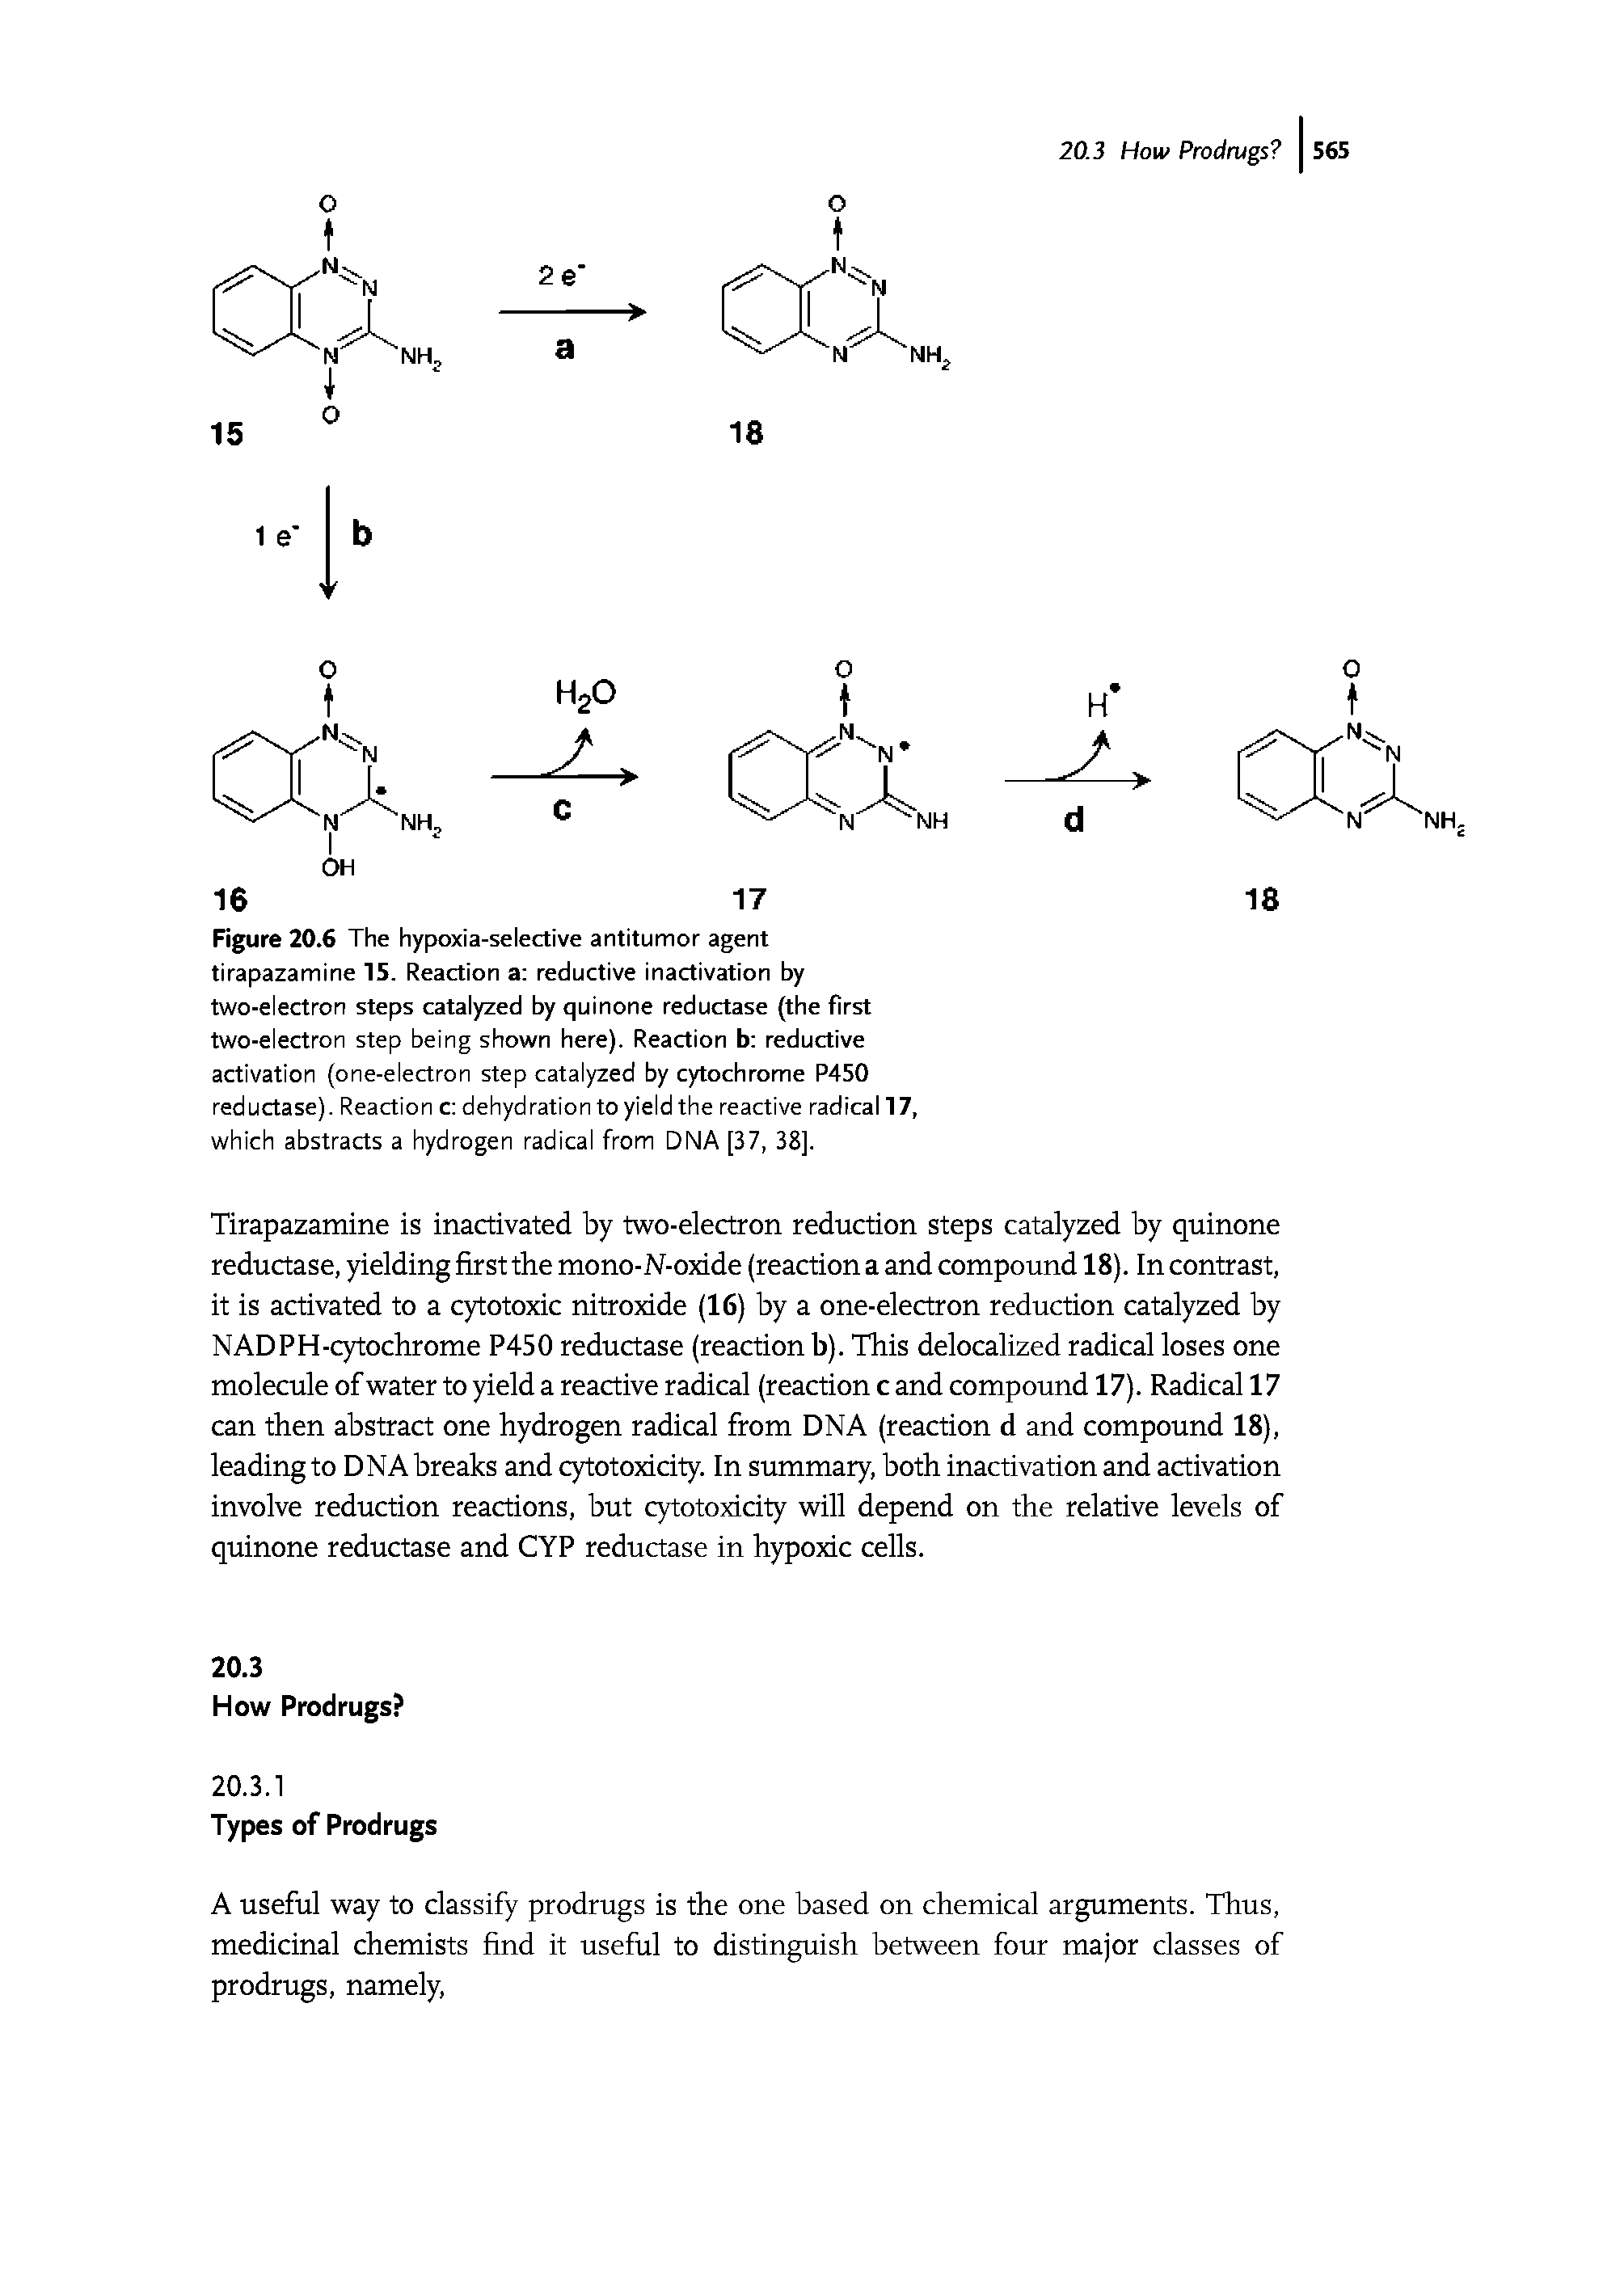 Figure 20.6 The hypoxia-selective antitumor agent tirapazamine 15. Reaction a reductive inactivation by two-electron steps catalyzed by quinone reductase (the first two-electron step being shown here). Reaction b reductive activation (one-electron step catalyzed by cytochrome P450 reductase). Reaction c dehydration to yield the reactive radical 17, which abstracts a hydrogen radical from DNA [37, 38].